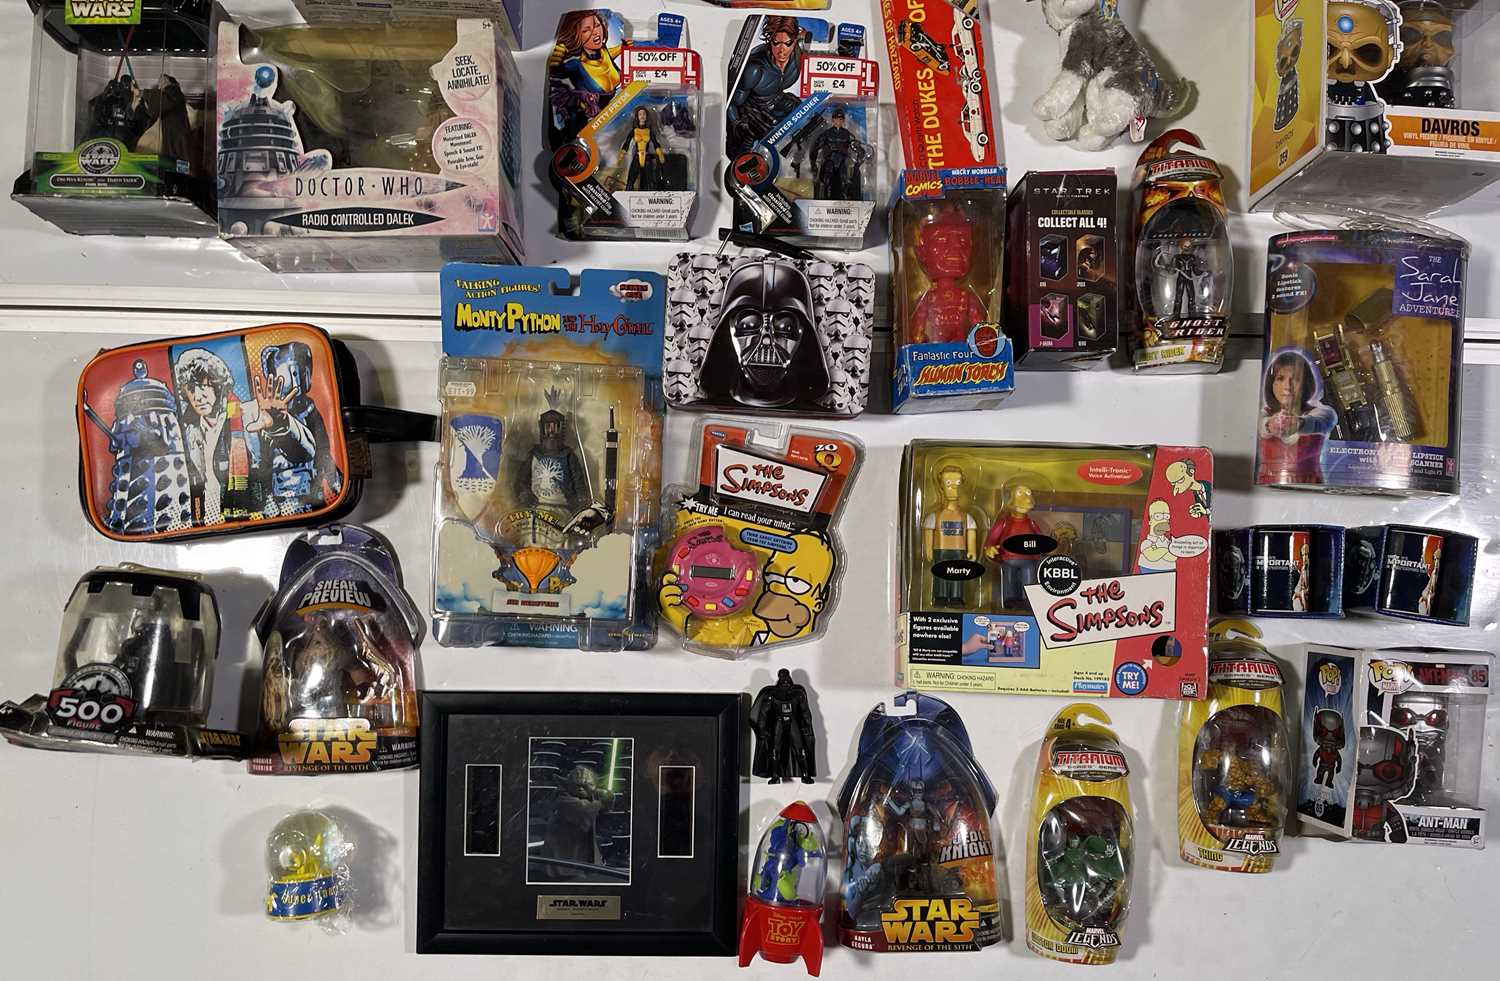 TOYS & FIGURINES (STAR WARS, DOCTOR WHO, MARVEL). - Image 2 of 3